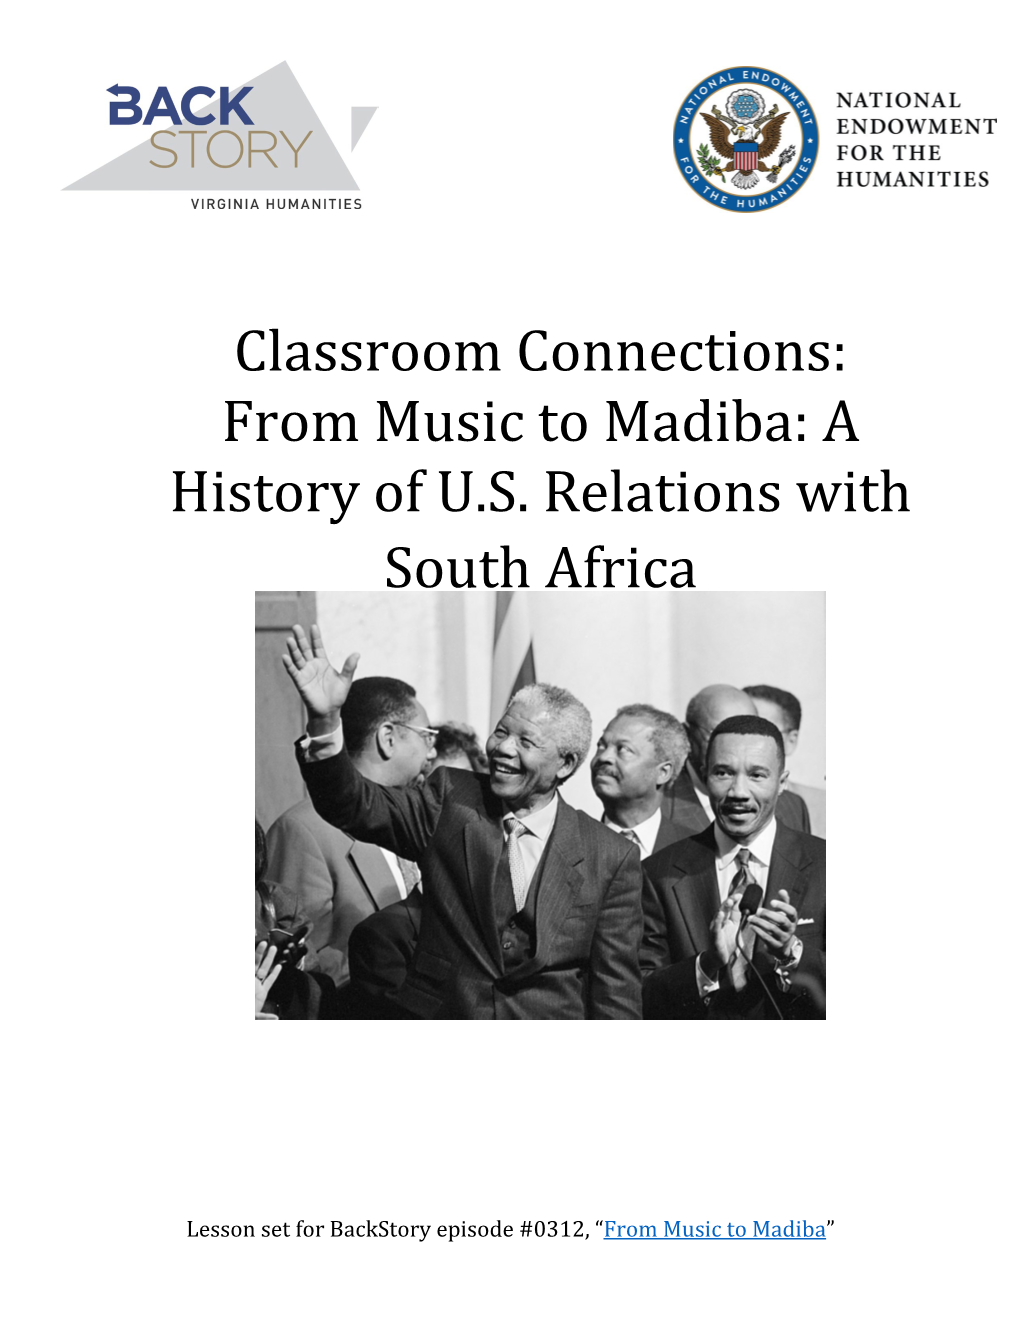 From Music to Madiba: a History of US Relations with South Africa